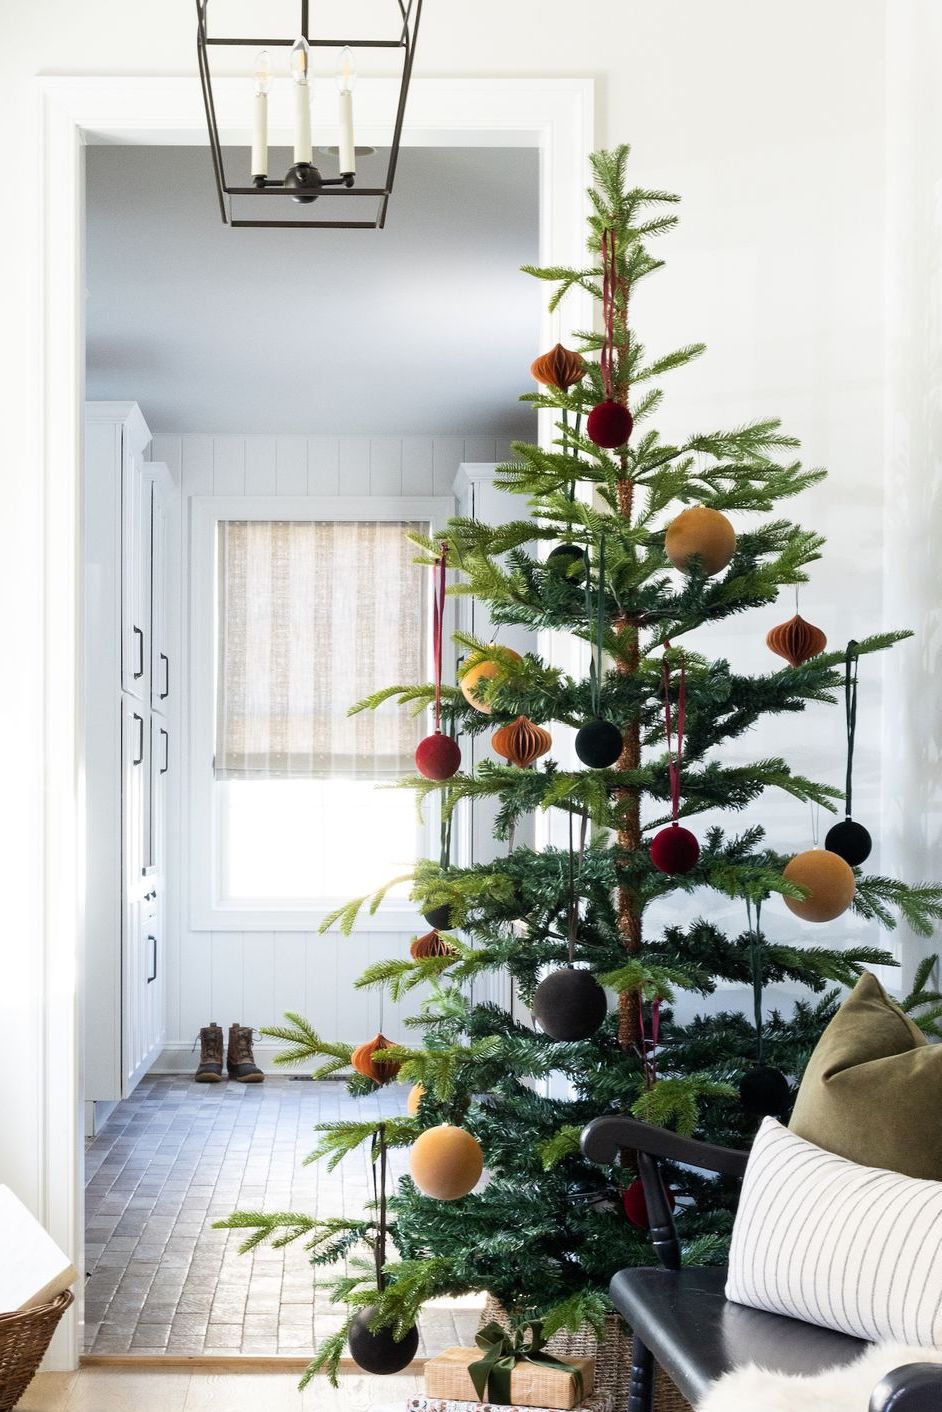 Eclectic Christmas Tree Ideas For a Unexpected, Unique Look